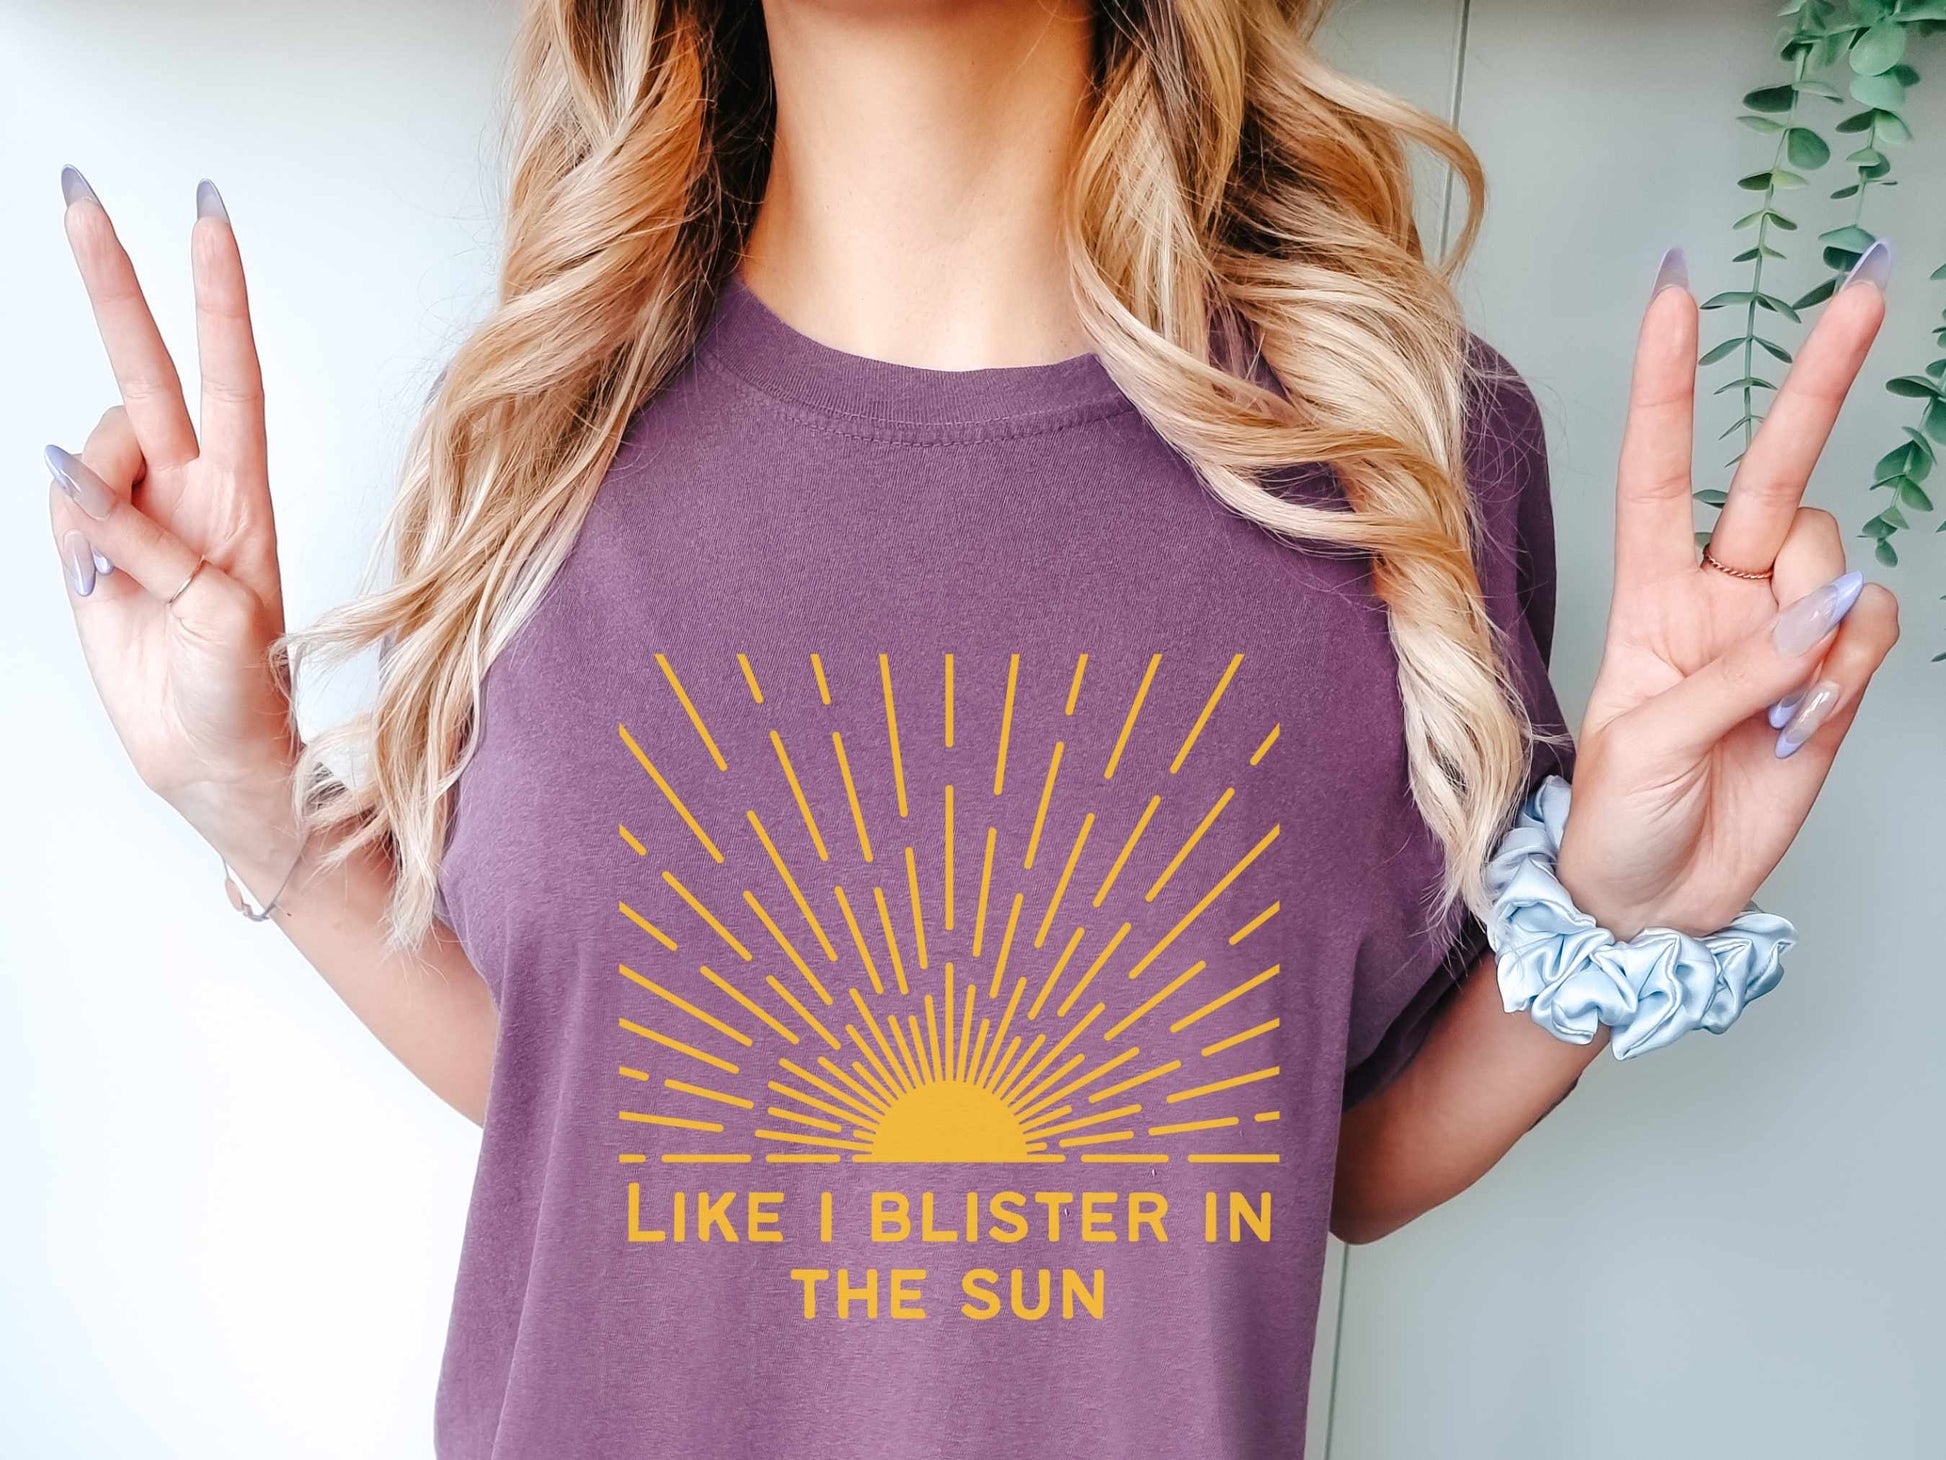 Violent Femmes "Blister in the Sun Tee" T-Shirt in Berry